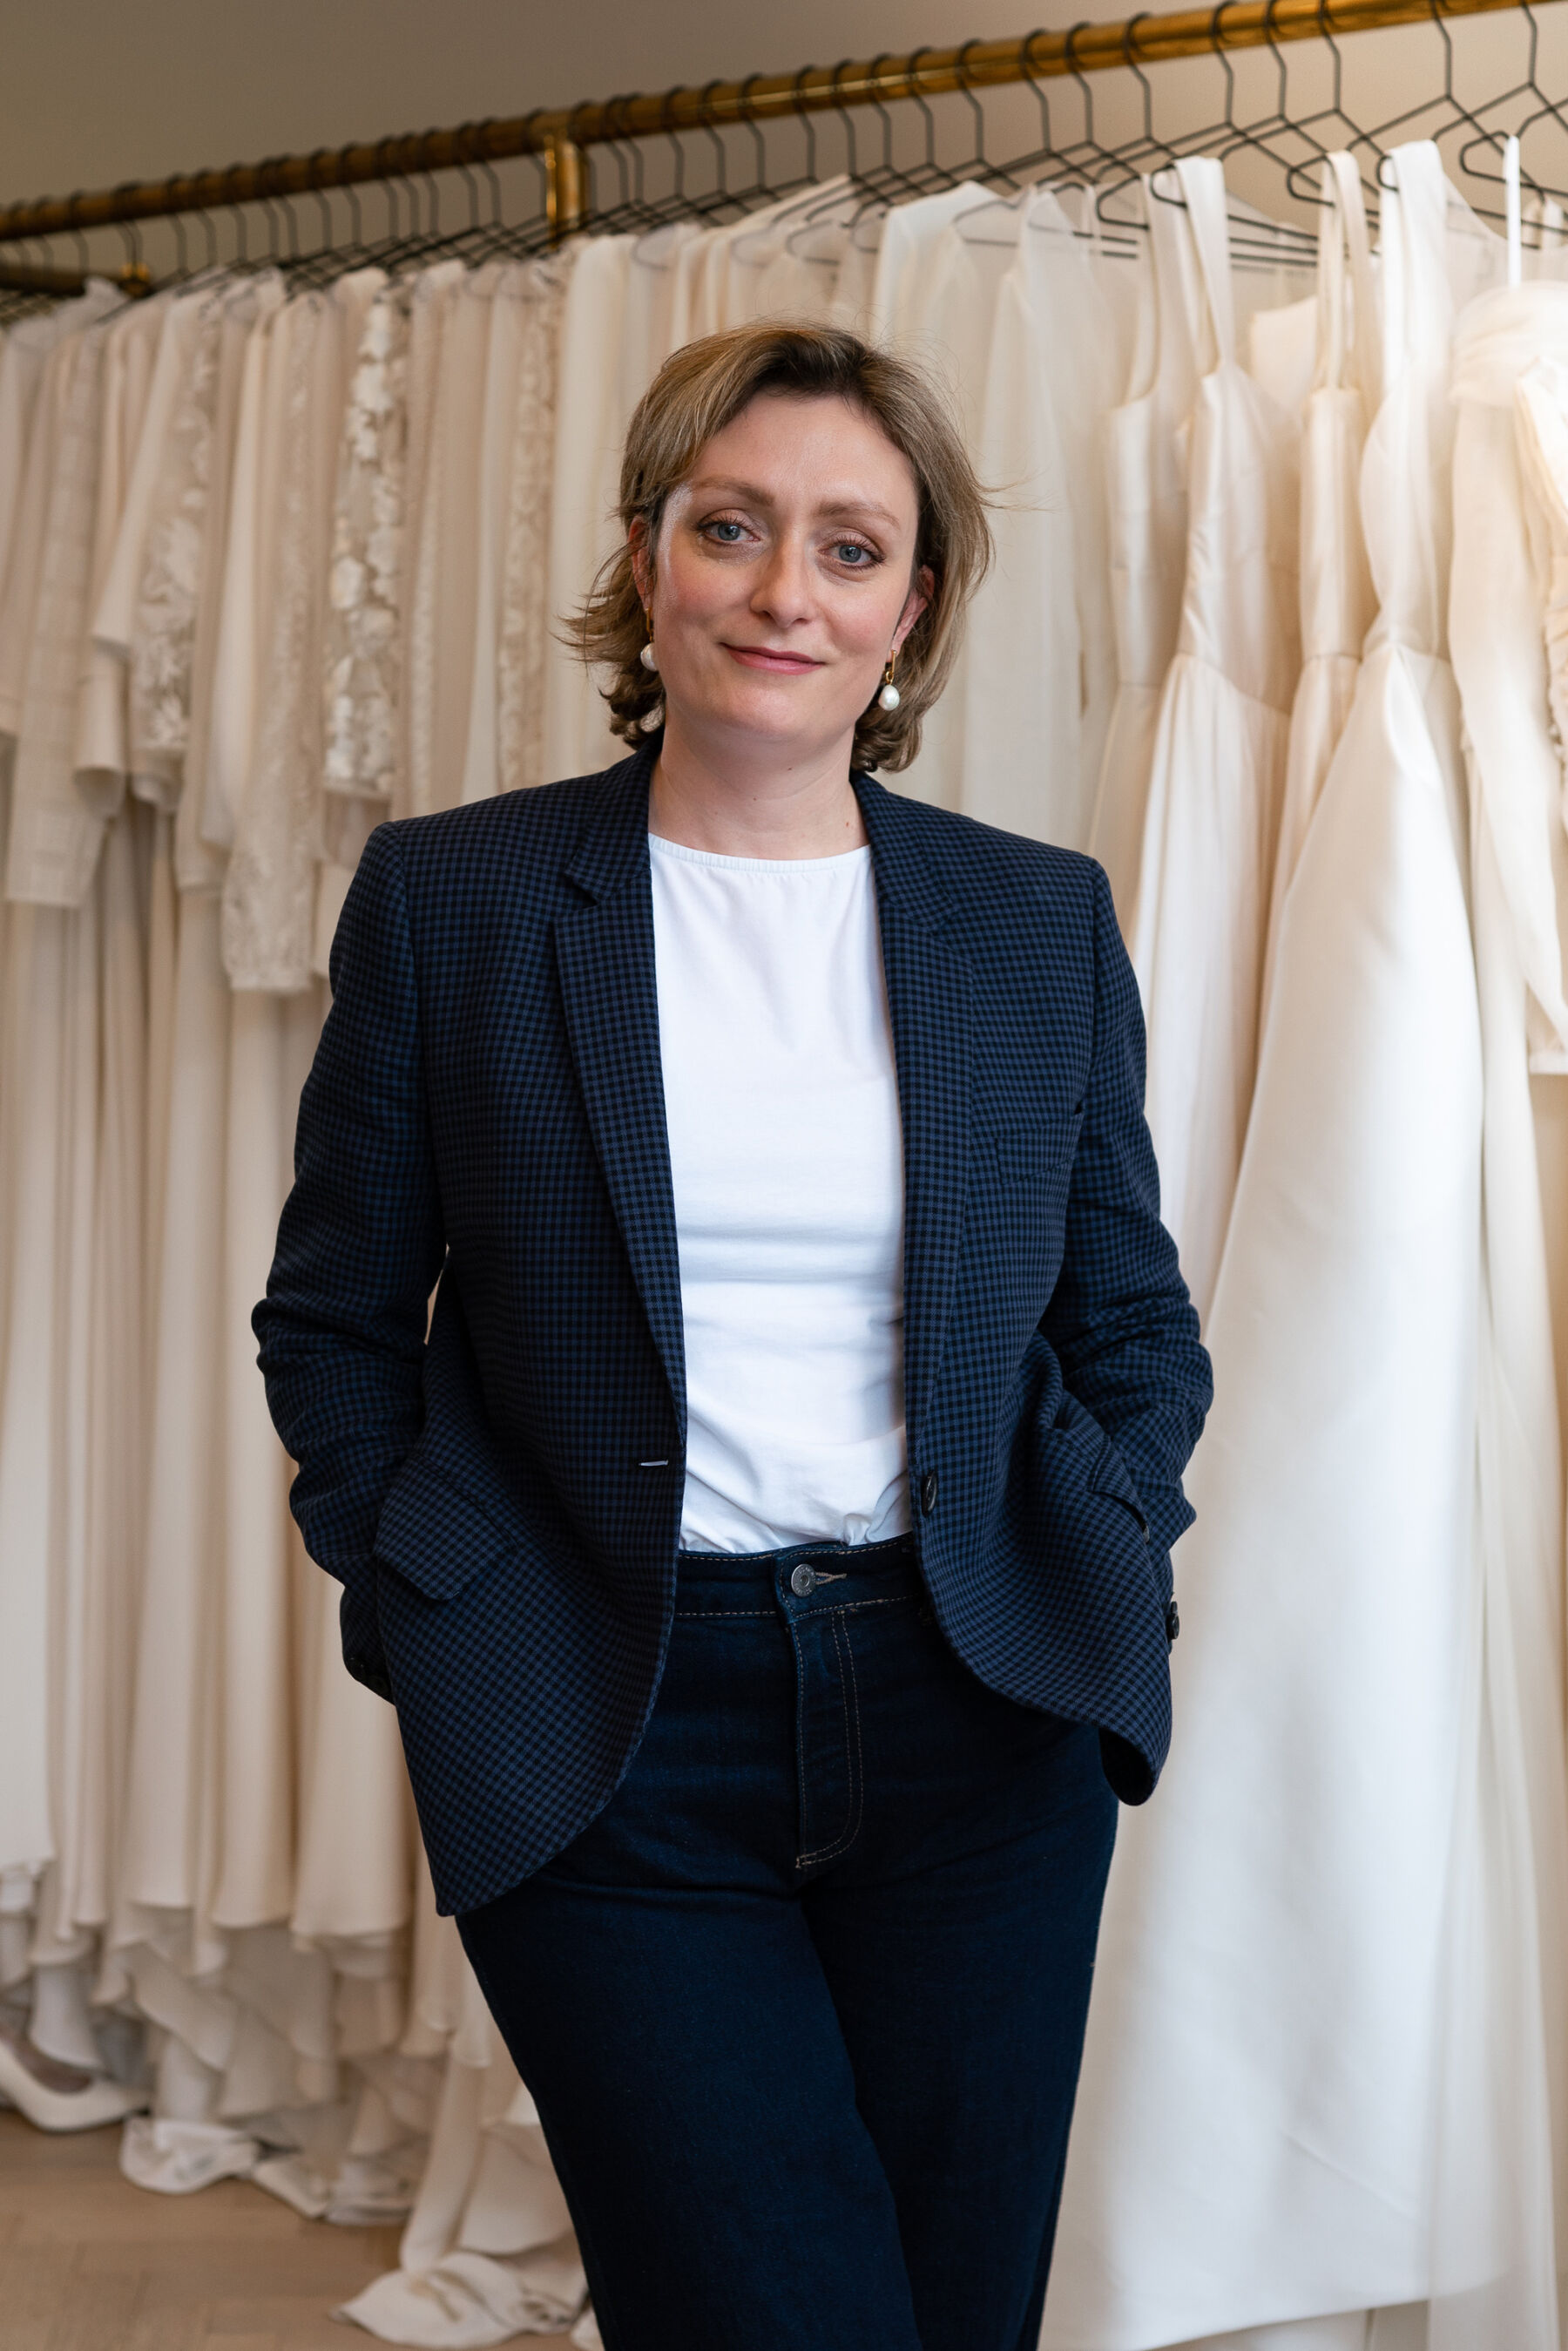 Designer Andrea Hawkes Bridal standing in her boutique in London